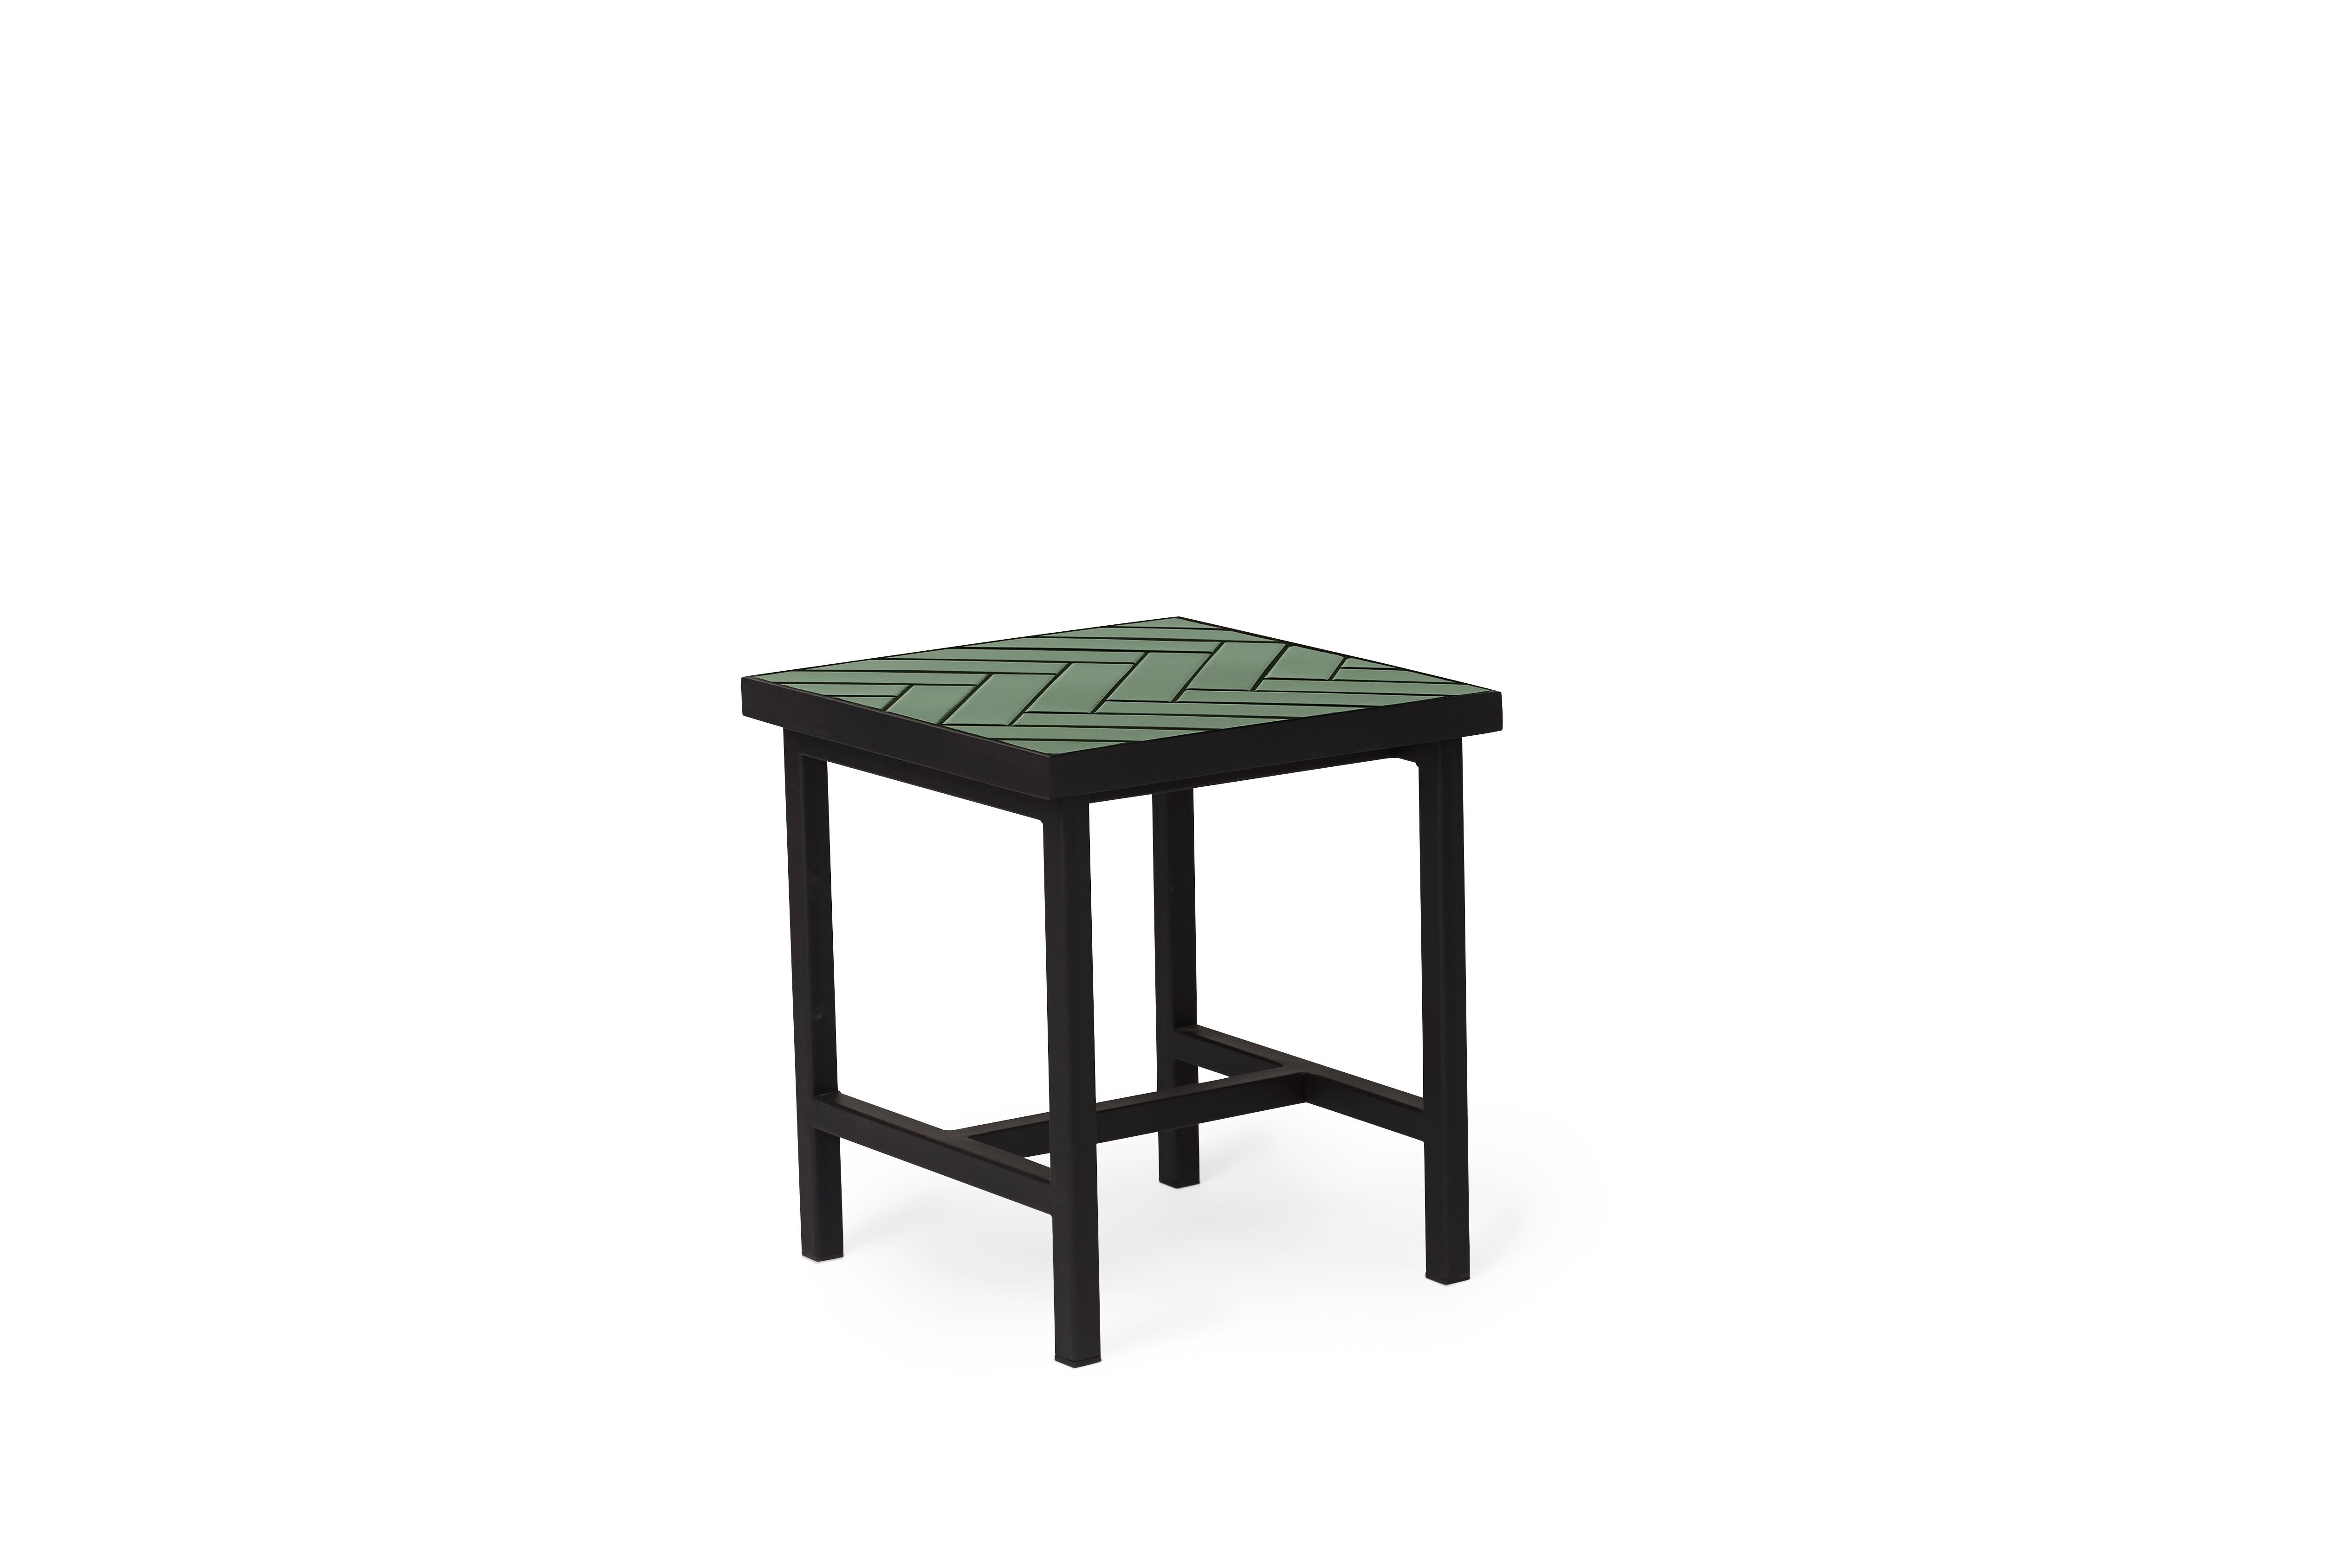 For Sale: Green (Forest green) Herringbone Side Table, by Charlotte Høncke from Warm Nordic 2